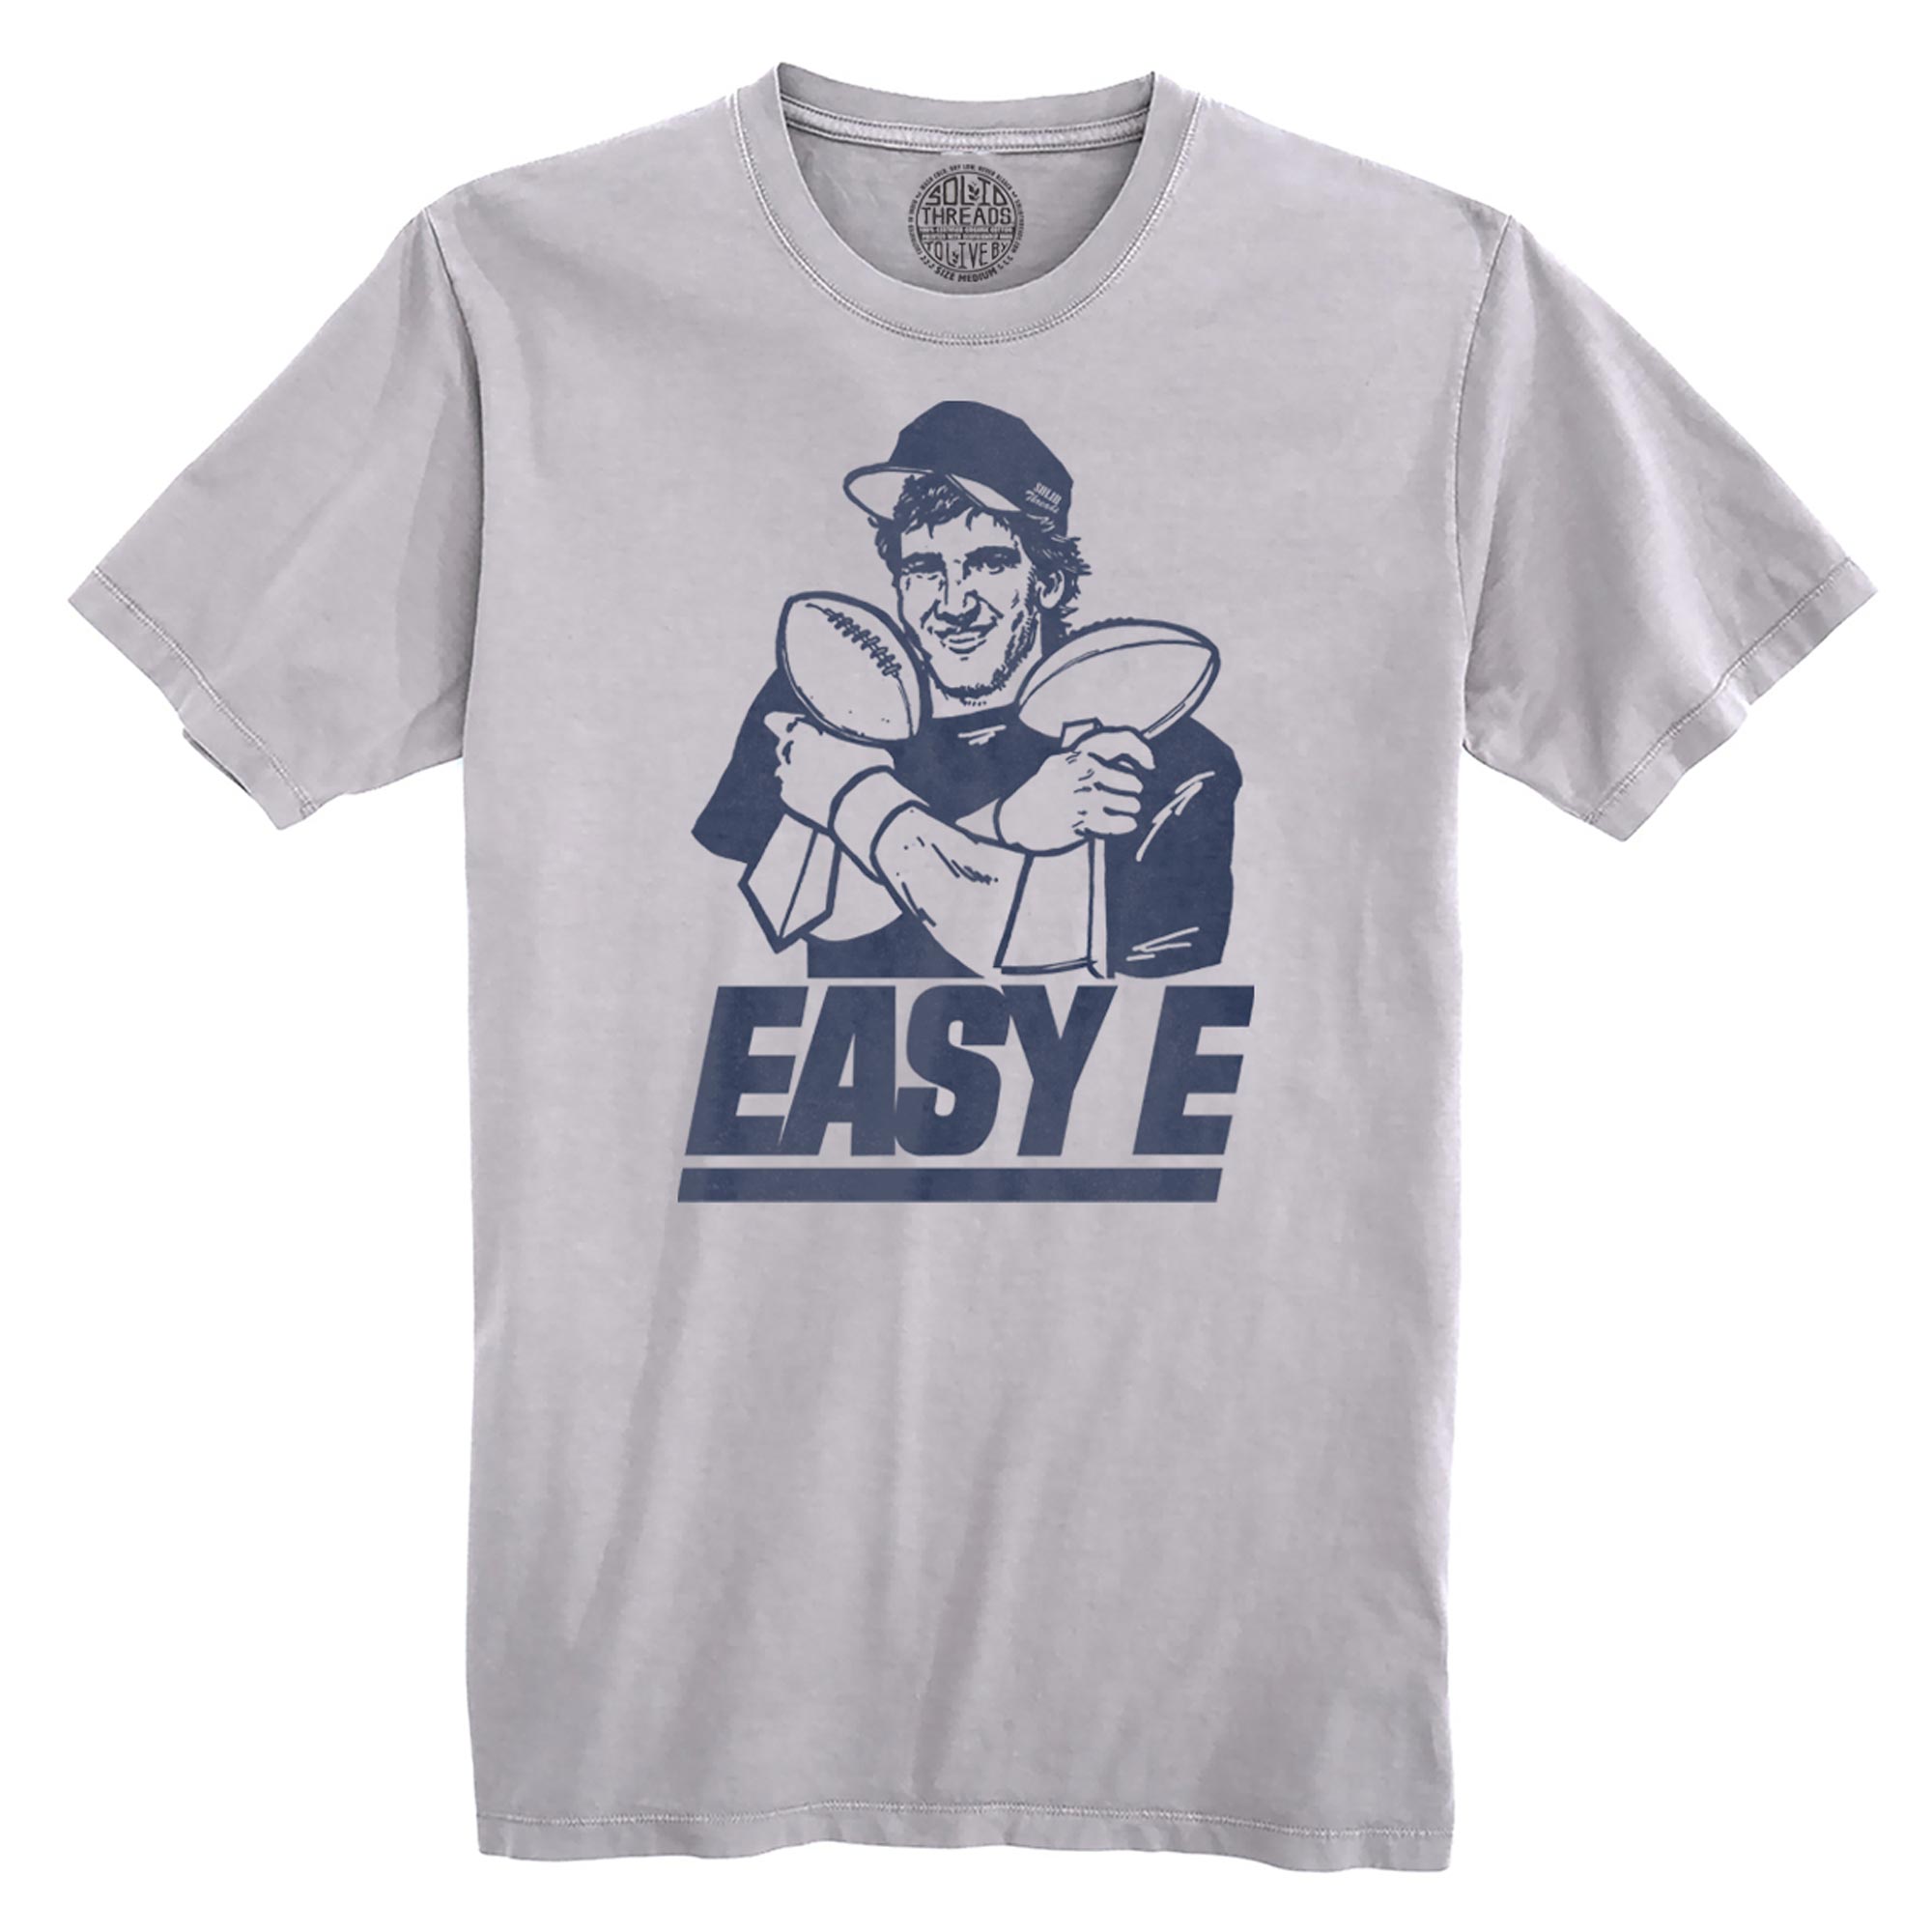 Easy E Vintage Organic Cotton T-shirt | Funny Ny Giants  Tee | Solid Threads